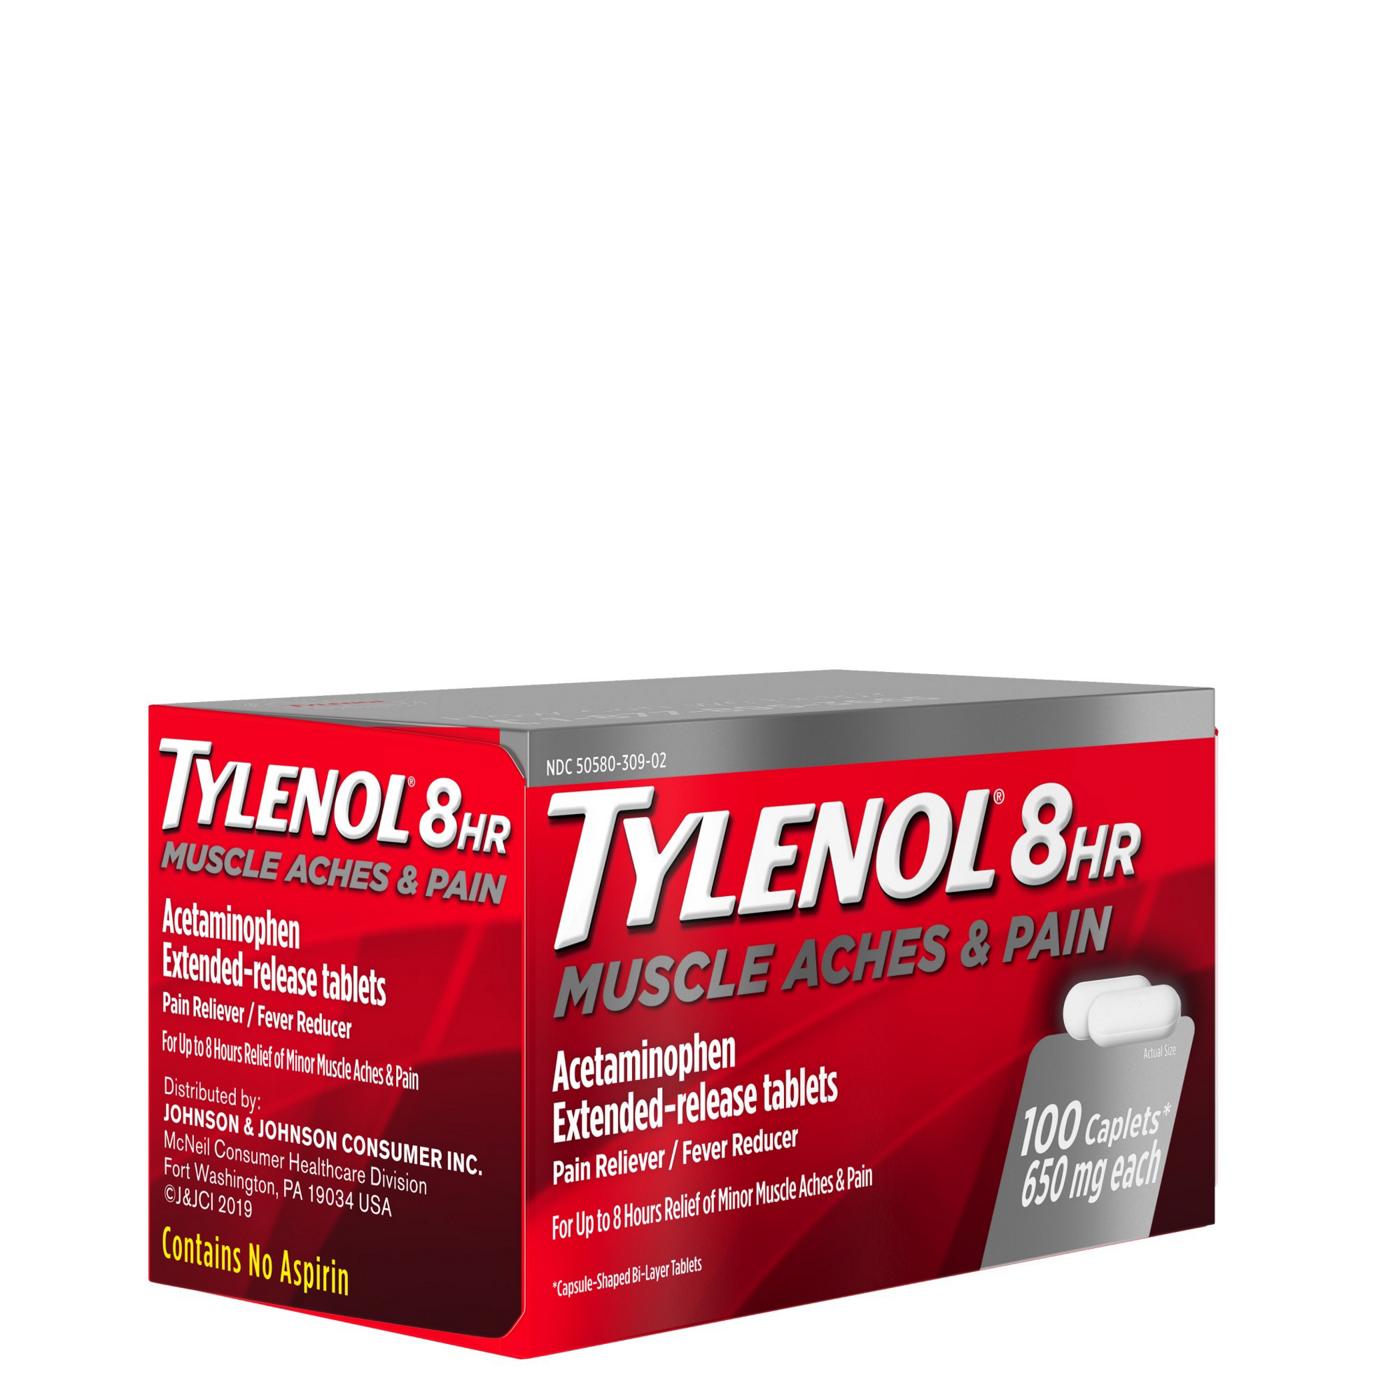 Tylenol 8 HR Muscle Aches & Pains; image 4 of 8